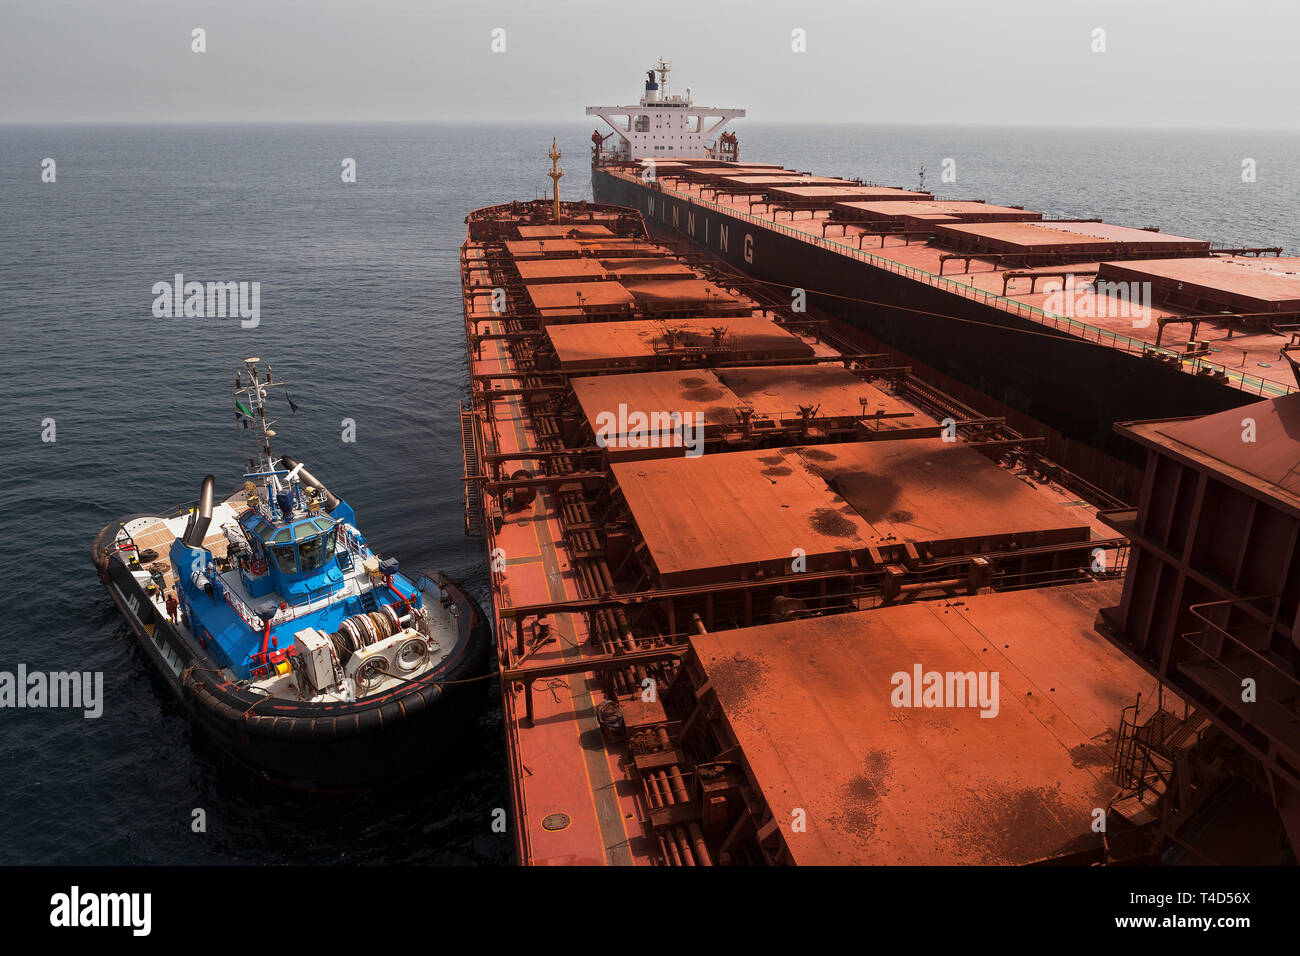 Managing and transporting iron ore. Waiting to unload fines ore from TGV transhipper into hold of OGV ocean going vessel at sea. Tug boat on standby. Stock Photo